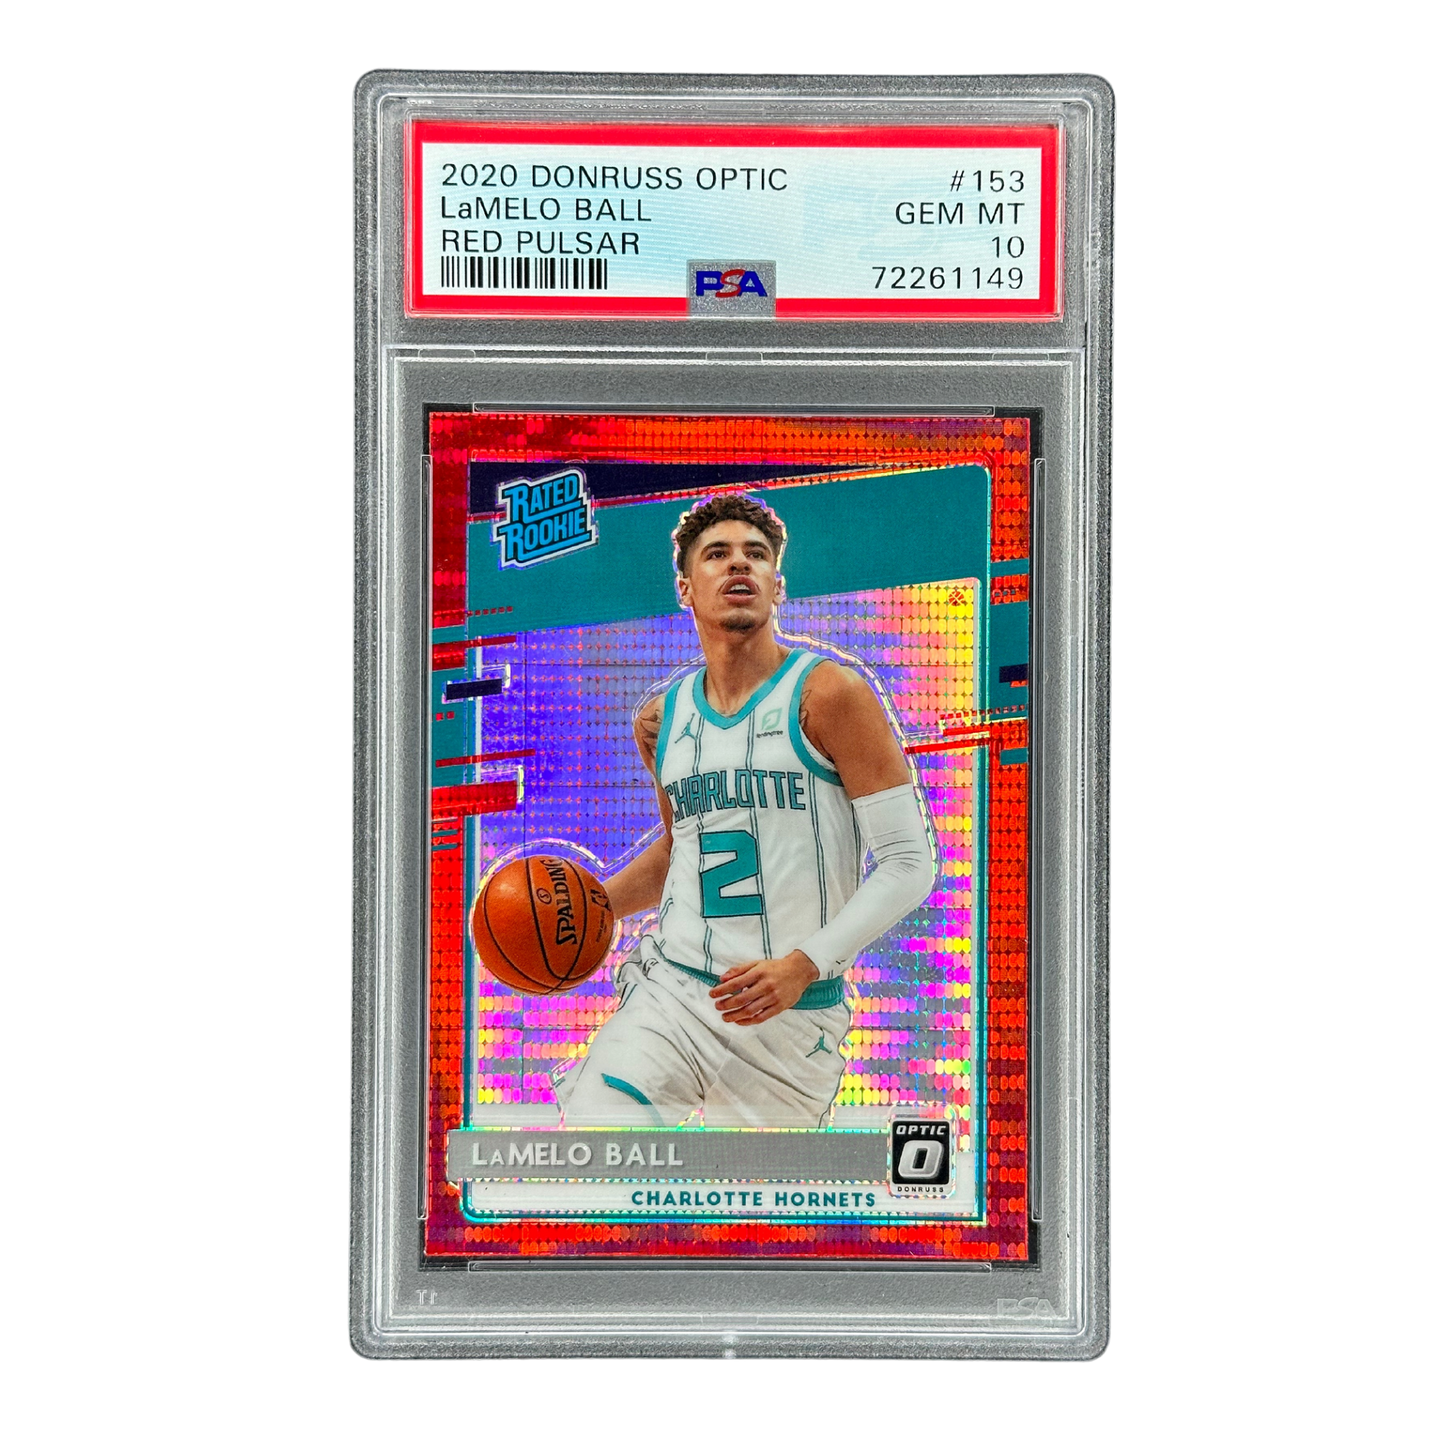 Lamelo Ball 2020 Donruss Optic Red Pulsar Rated Rookie RC Card PSA 10 #153